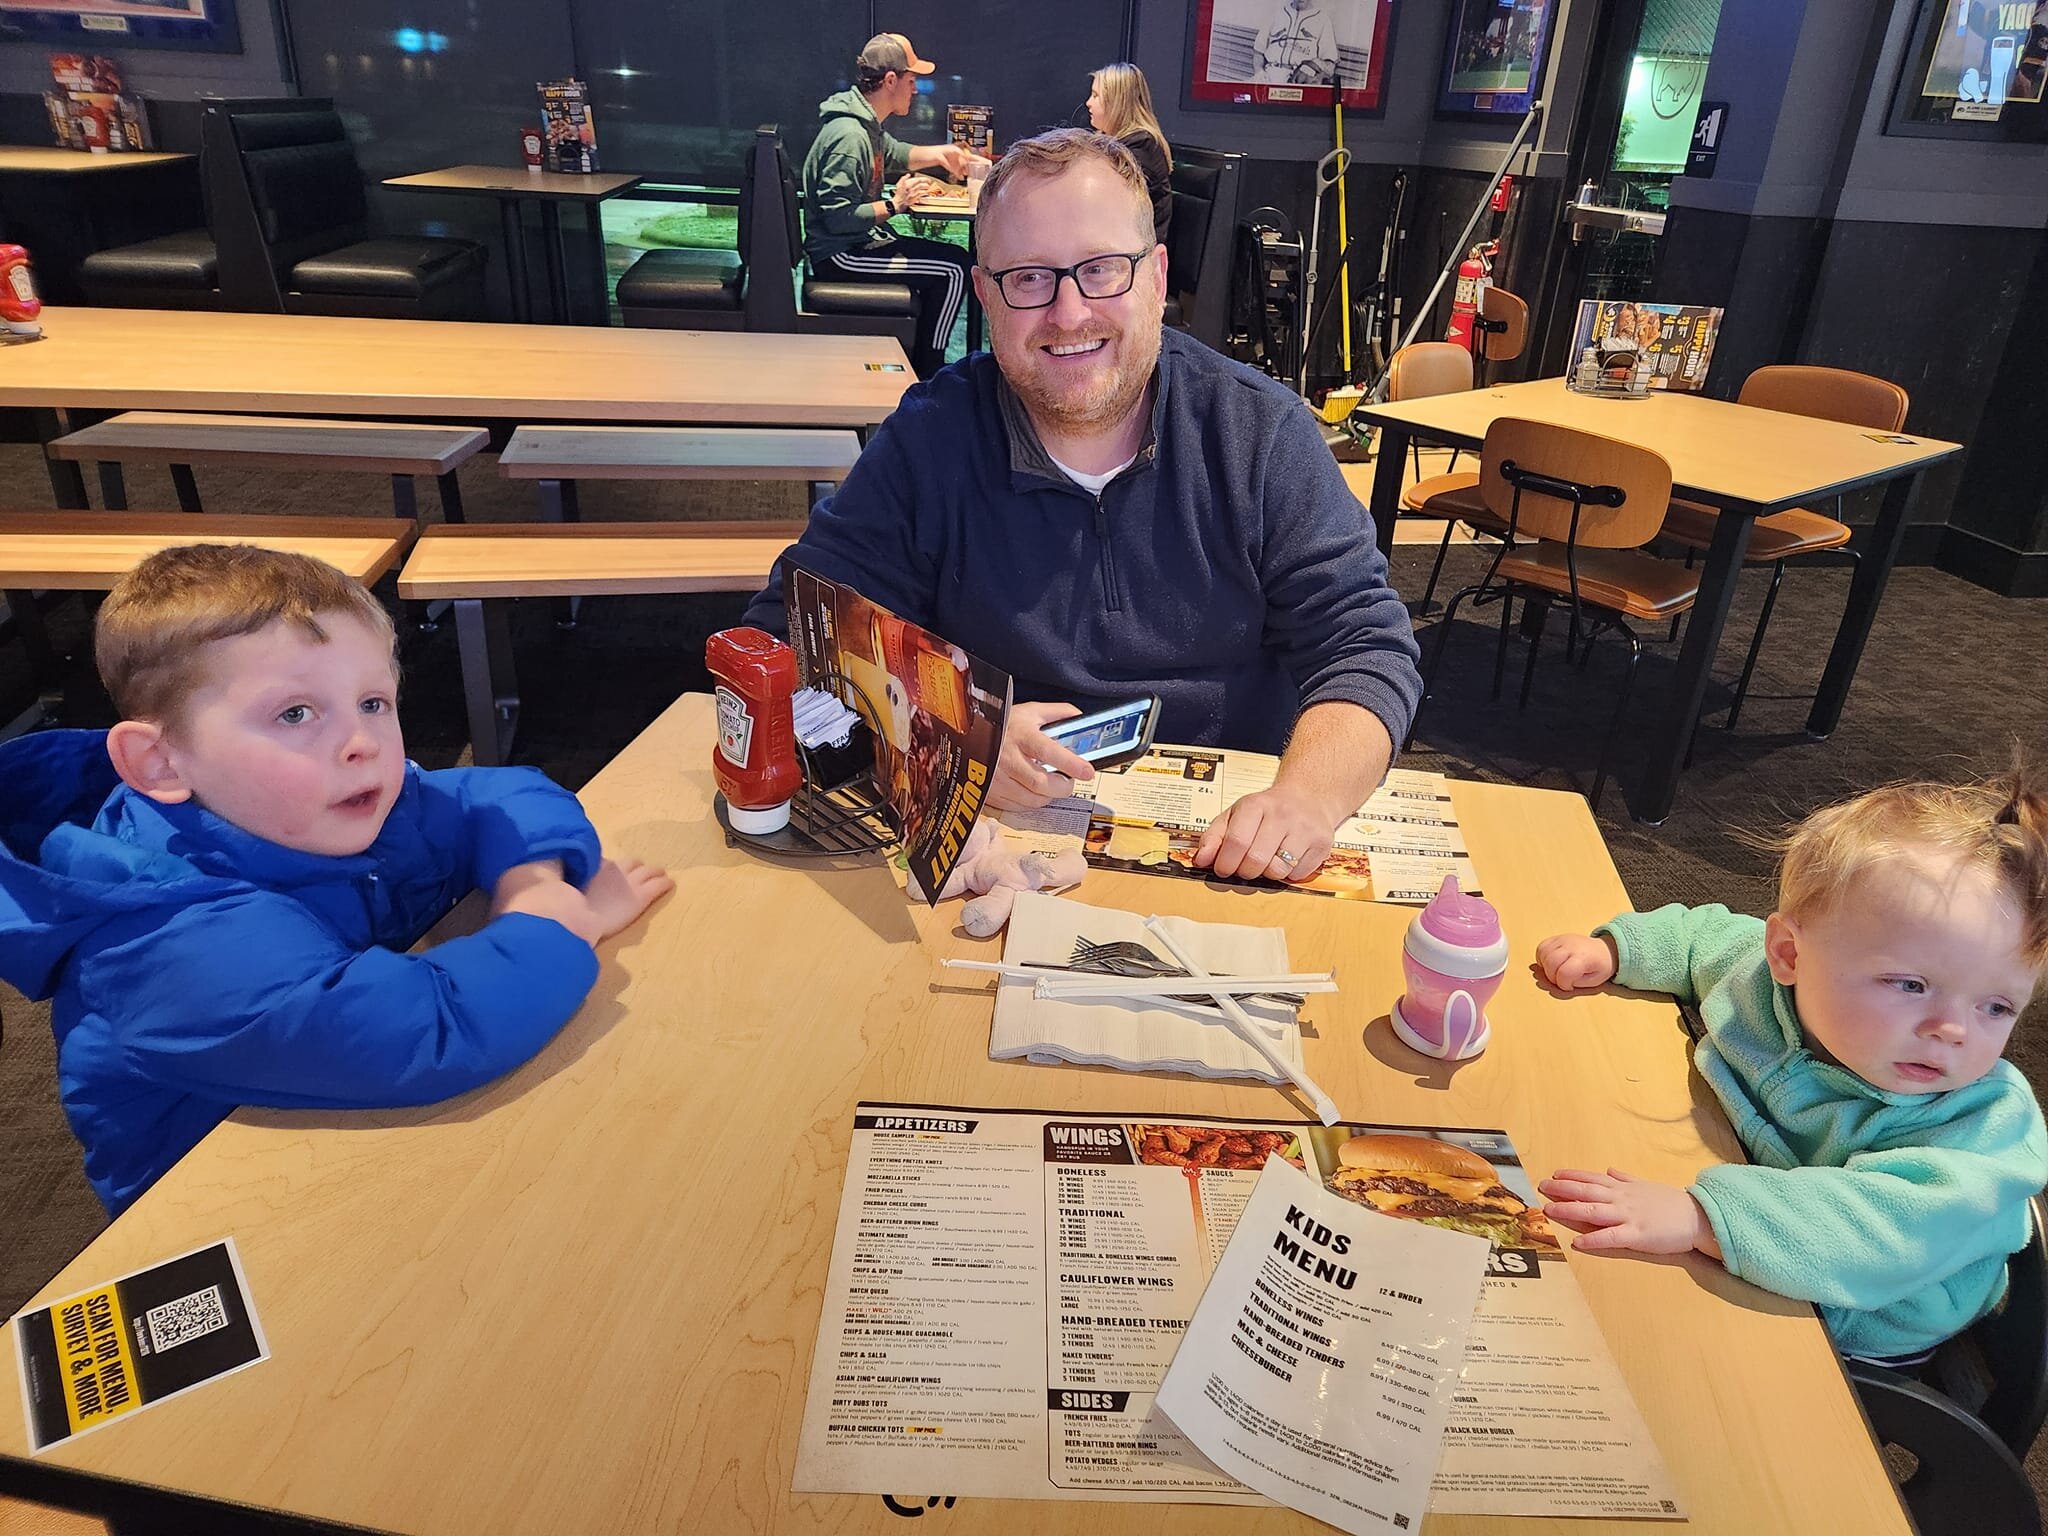 Annual Jan. 9 BWW post.

Kevin and I met on our first date 12 (!!!) years ago at Buffalo Wild Wings in Columbia.

I remember we ordered chips and salsa. Tonight, Eli insisted on chips and queso, and Evie gave our menus to the server.

Never would hav